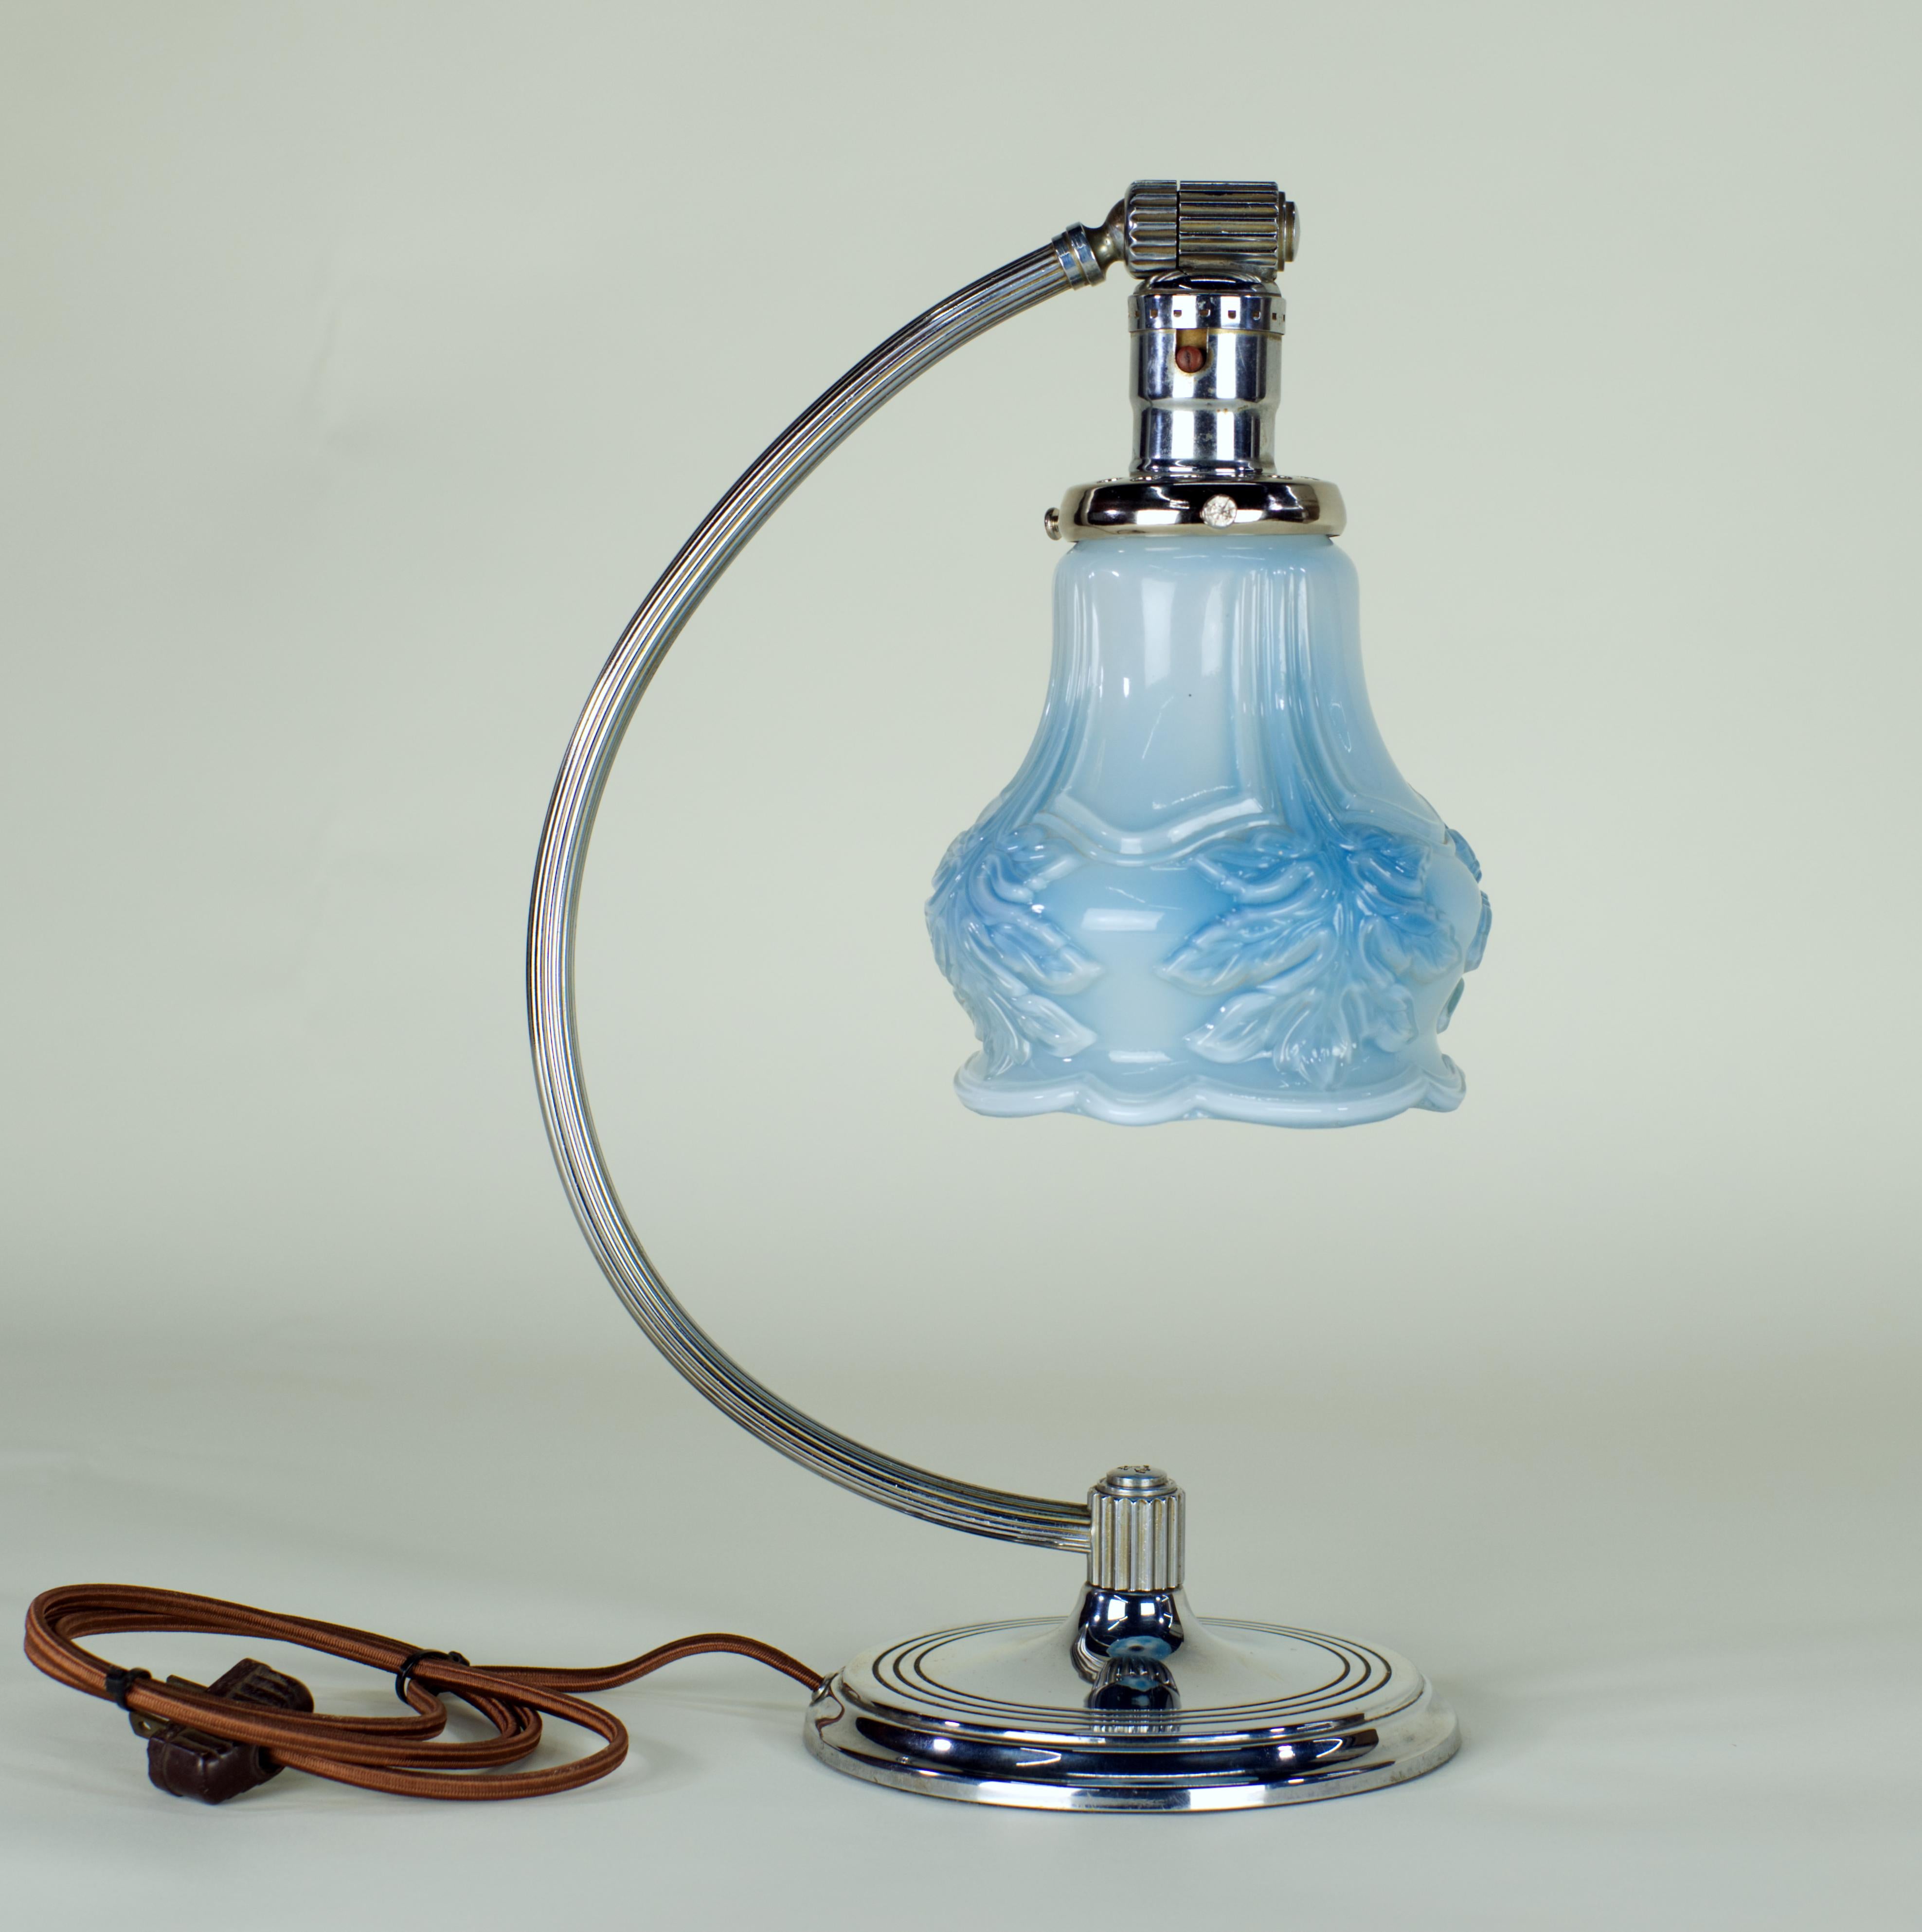 Lovely Art Deco table lamp made by Chase Brass and Copper Company of Waterbury, Connecticut. Art Deco line was produced by Chase until 1940s then company switched to producing wartime items.
Chrome plating is in a good shape with some very minor